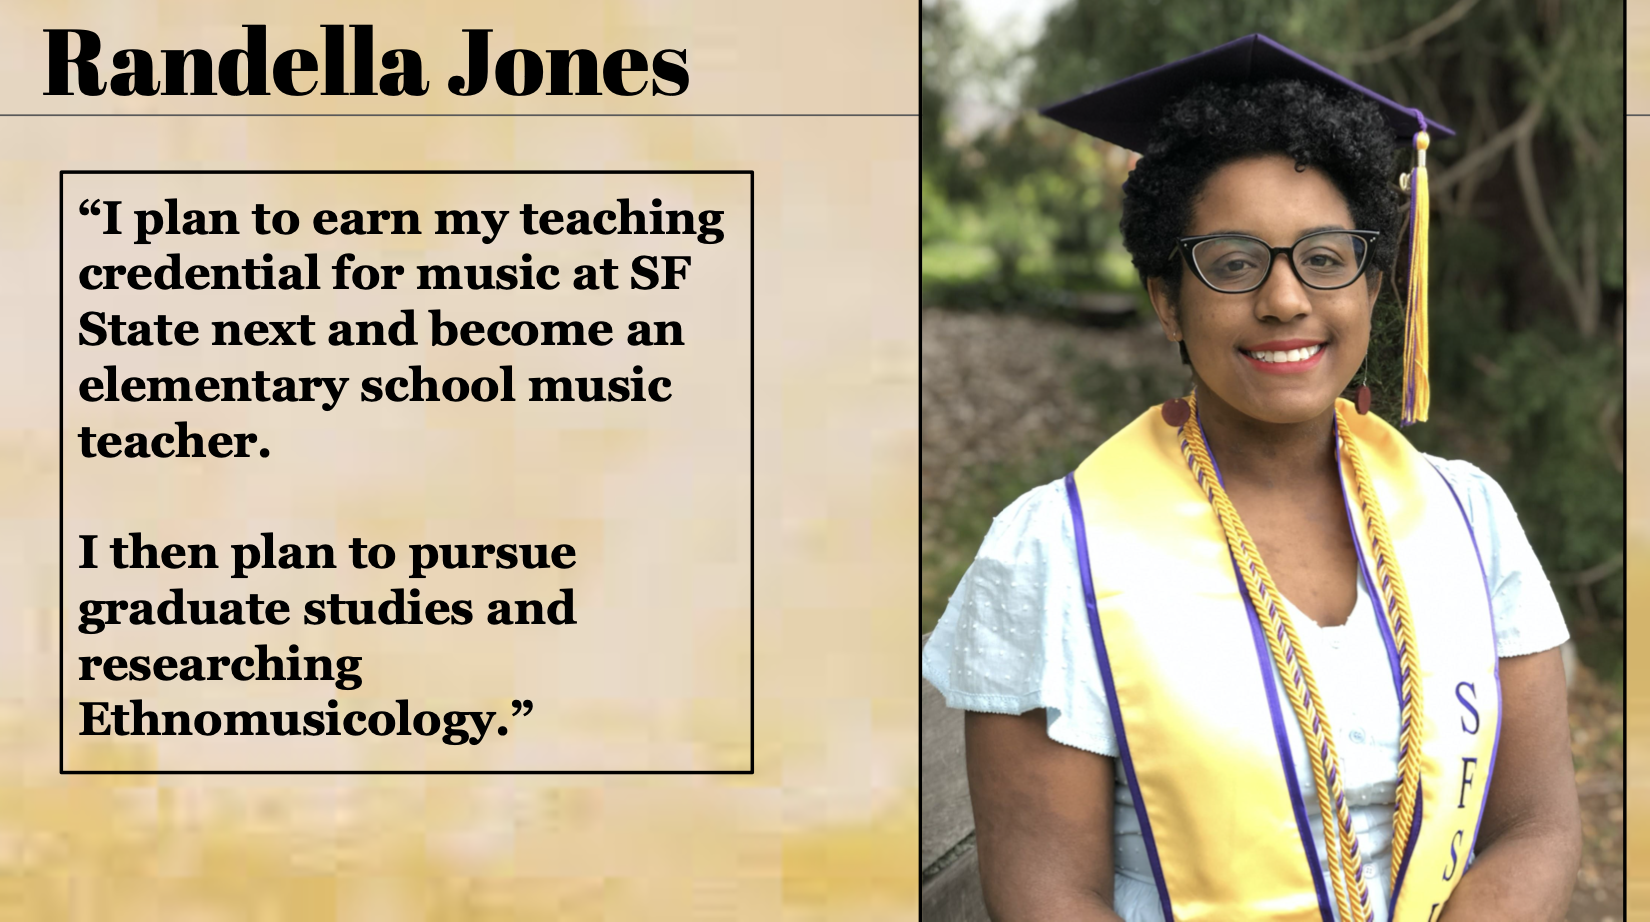 Randella Jones plans to earn my teaching credential for music at SF State next to become an elementary school music teacher.